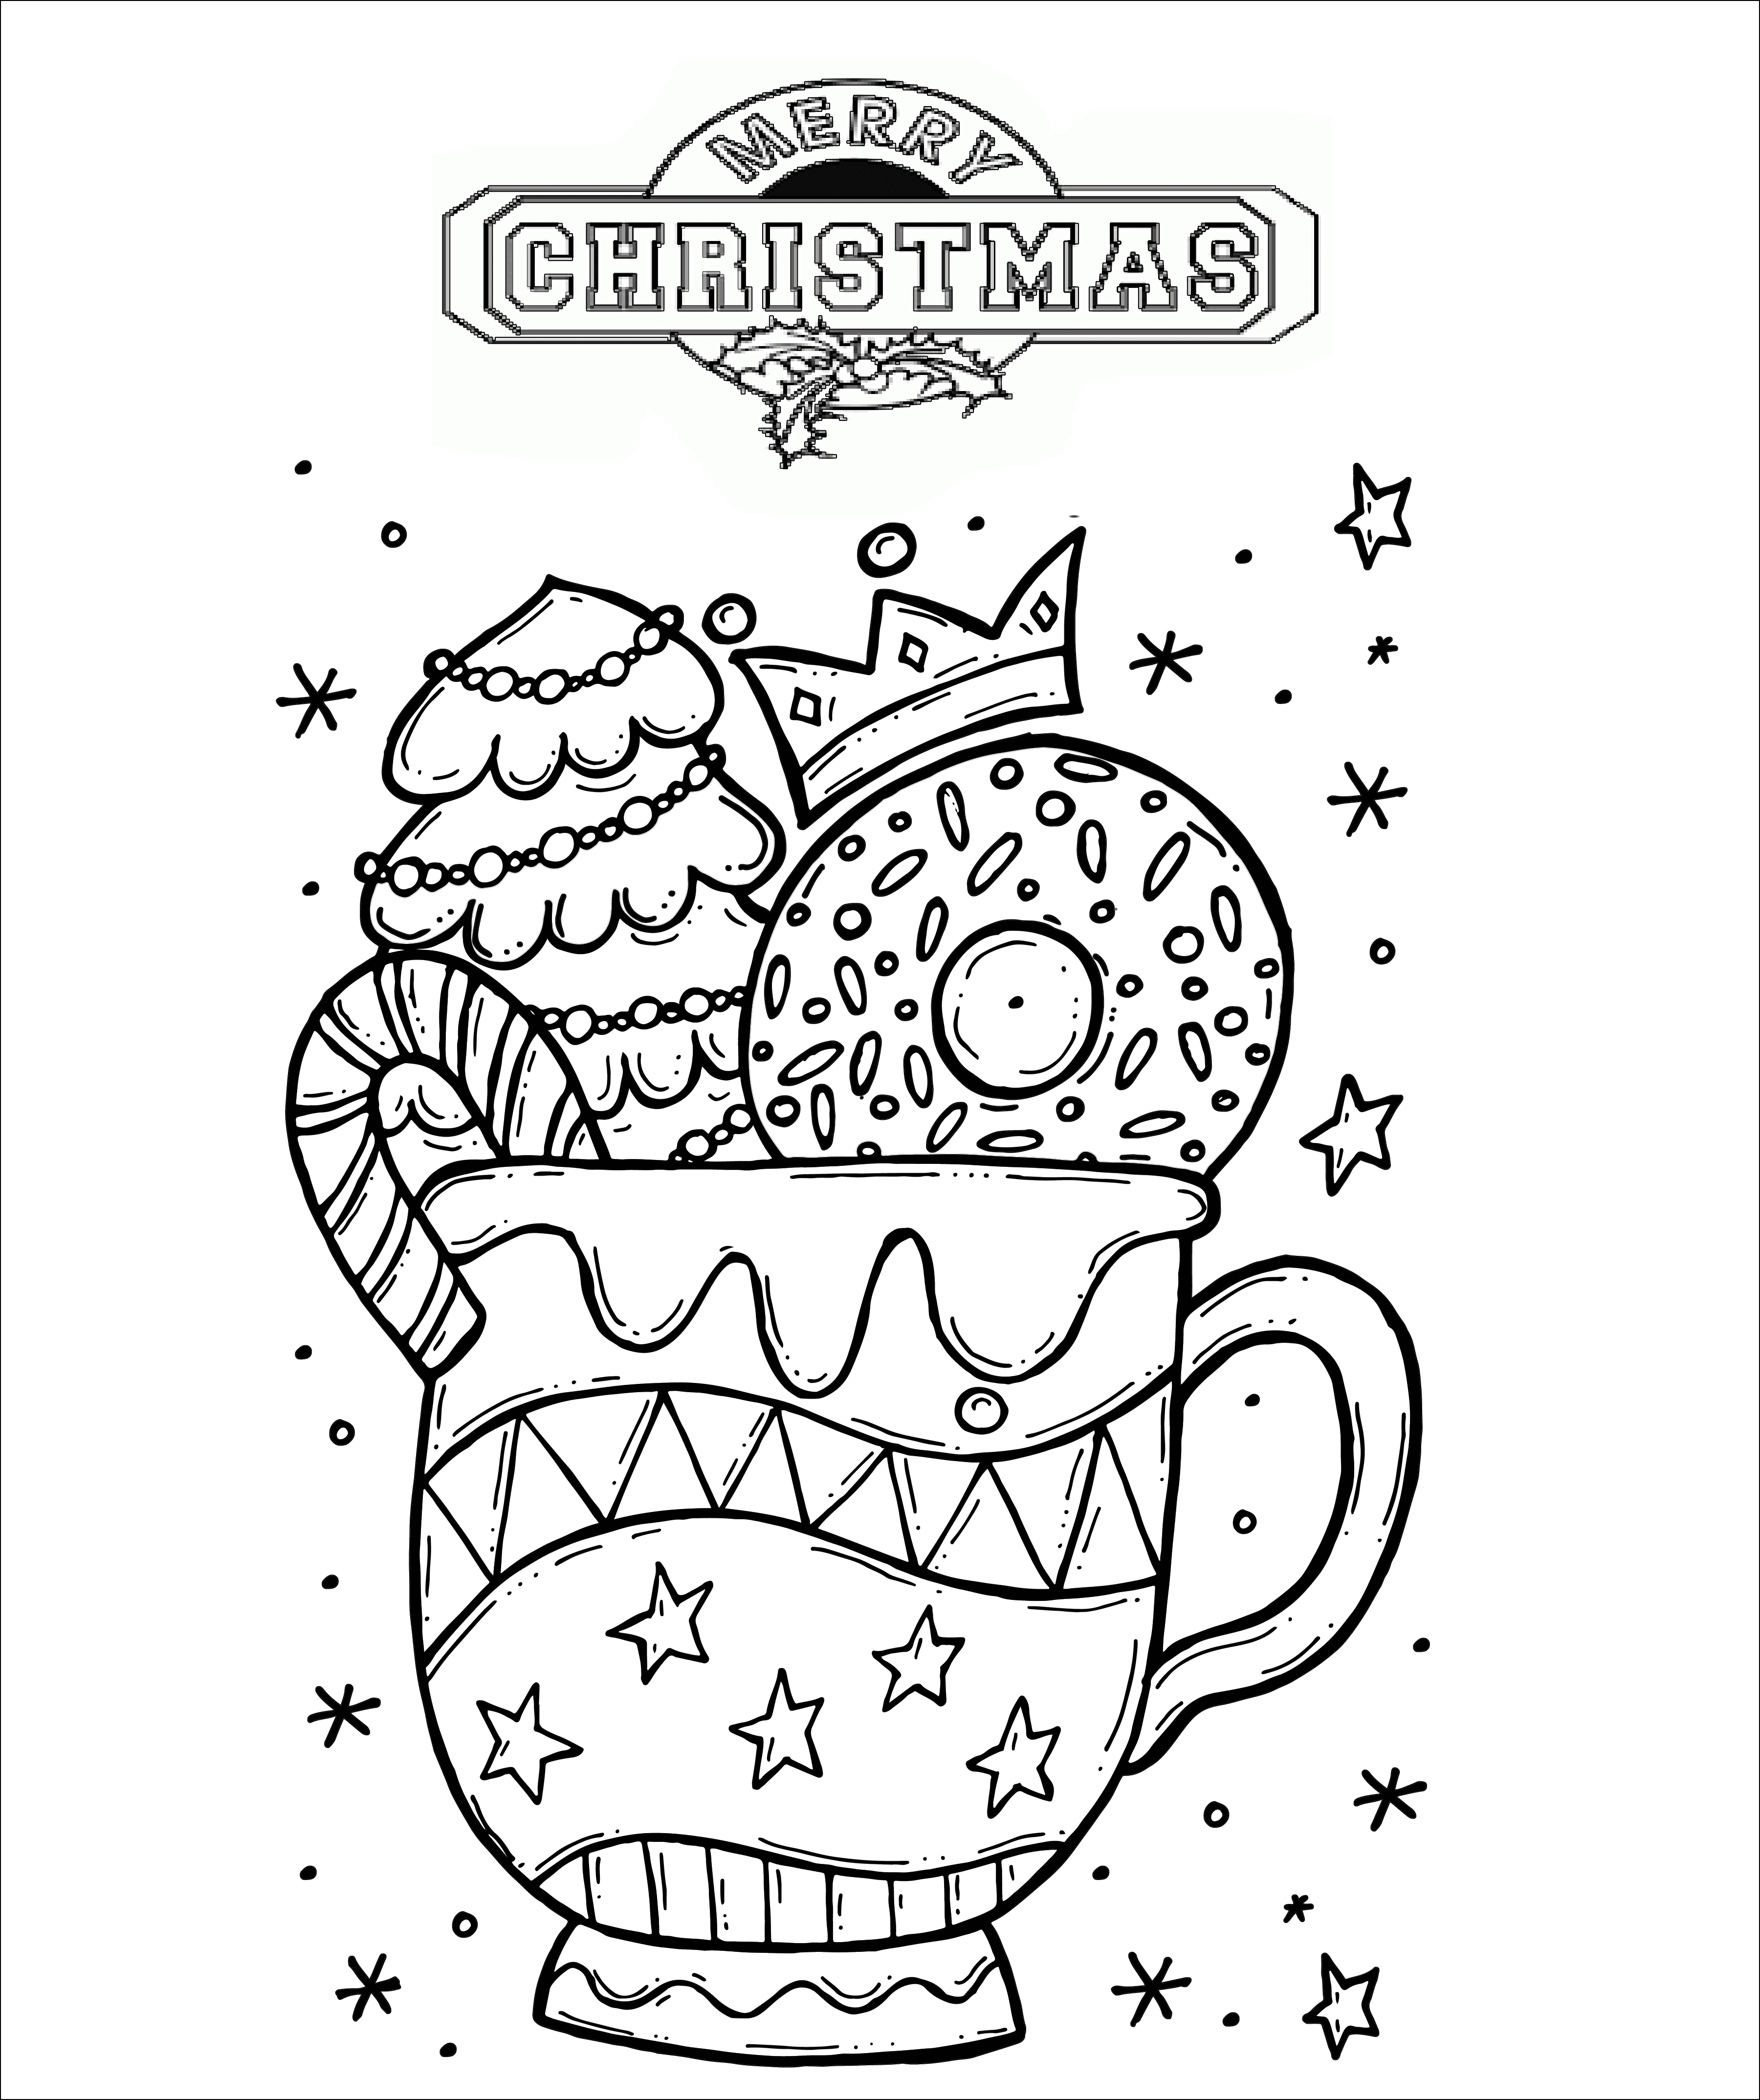 Christmas 2022 Picture For Children Coloring Page